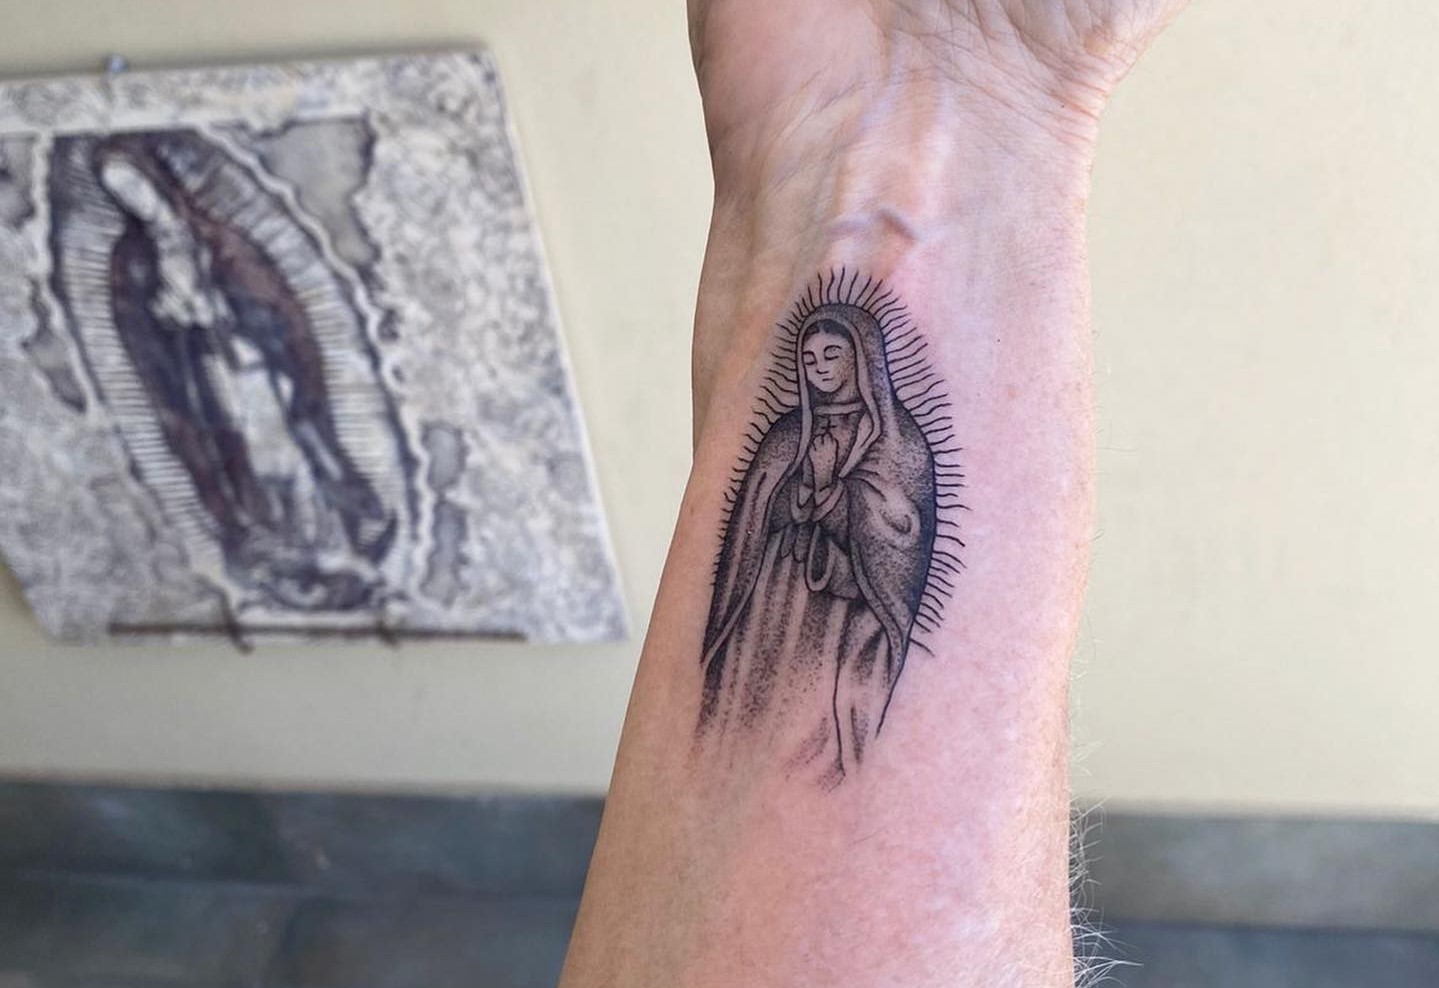 Our Lady of Guadalupe  Tattooed Now 